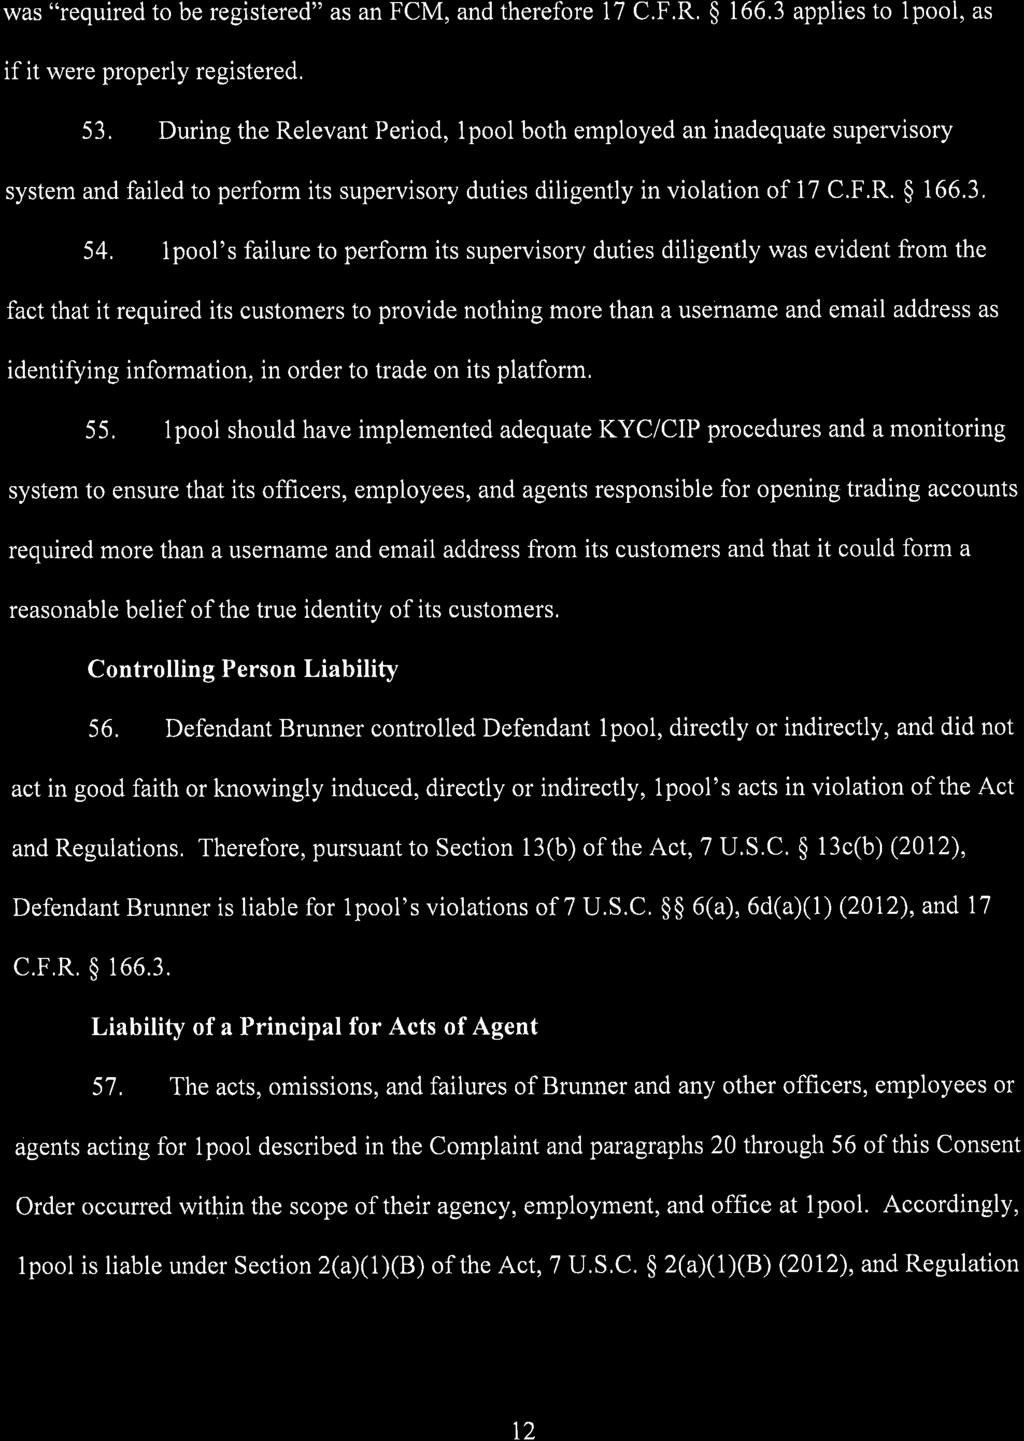 Case 1:18-cv-02243-TNM Document 14 Filed 03/04/19 Page 12 of 20 was "required to be registered" as an FCM, and therefore 17 C.F.R. 166.3 applies to lpool, as if it were properly r_egistered. 53.